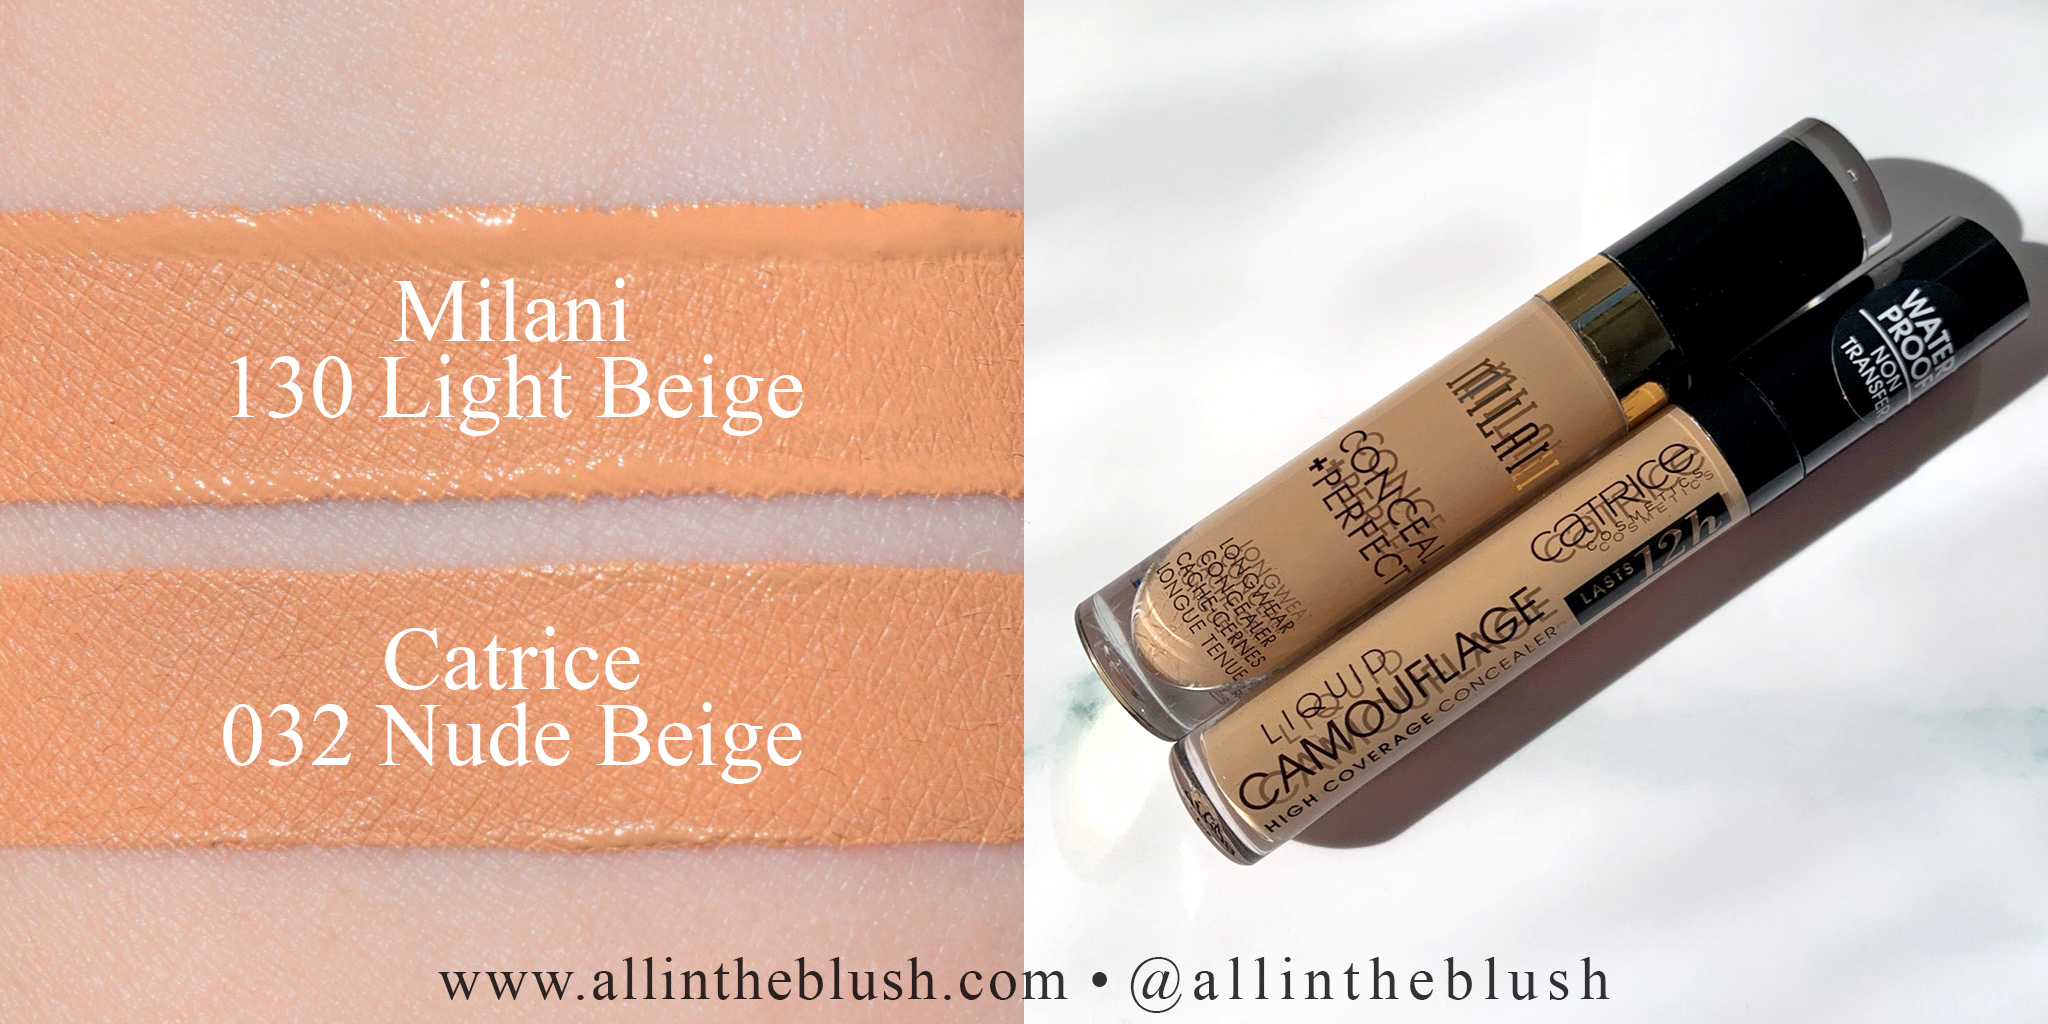 Swatch - Milani Conceal + Perfect Longwear Concealer 130 Light Beige and Catrice 032 Nude Beige Liquid Camouflage Concealer